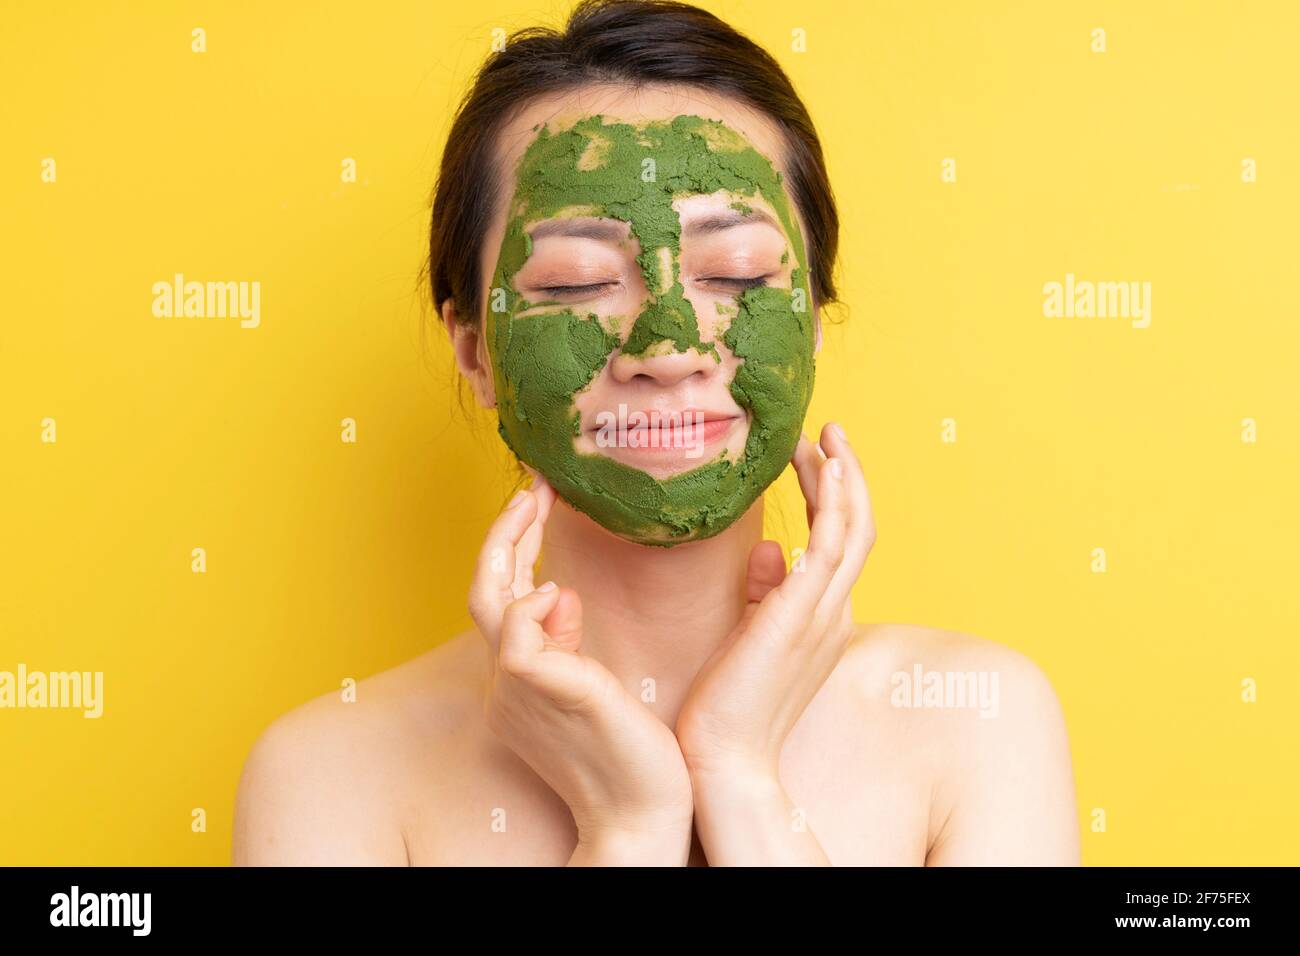 Young girl masked to exfoliate, beautify herself Stock Photo